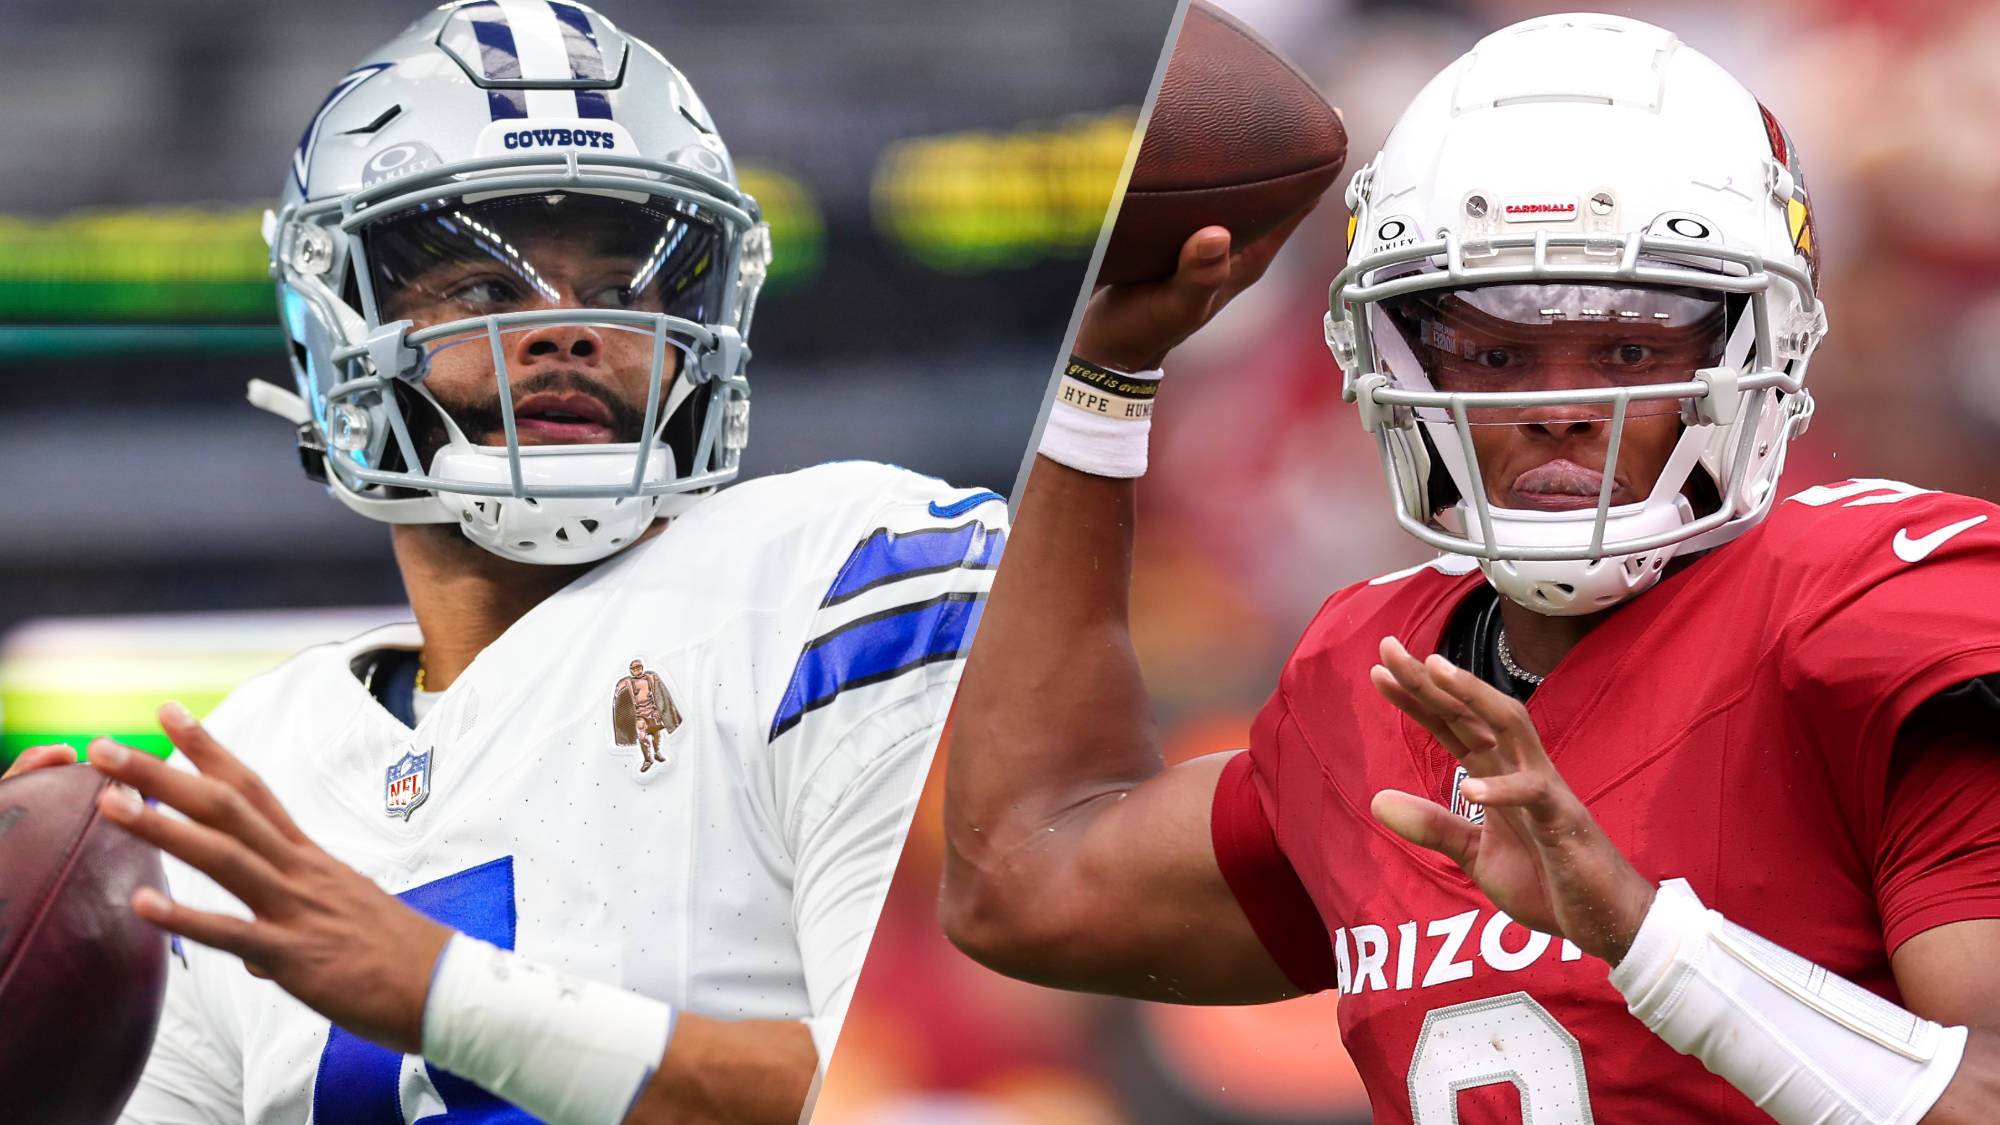 Cowboys vs Cardinals live stream: How to watch NFL week 3 online right now